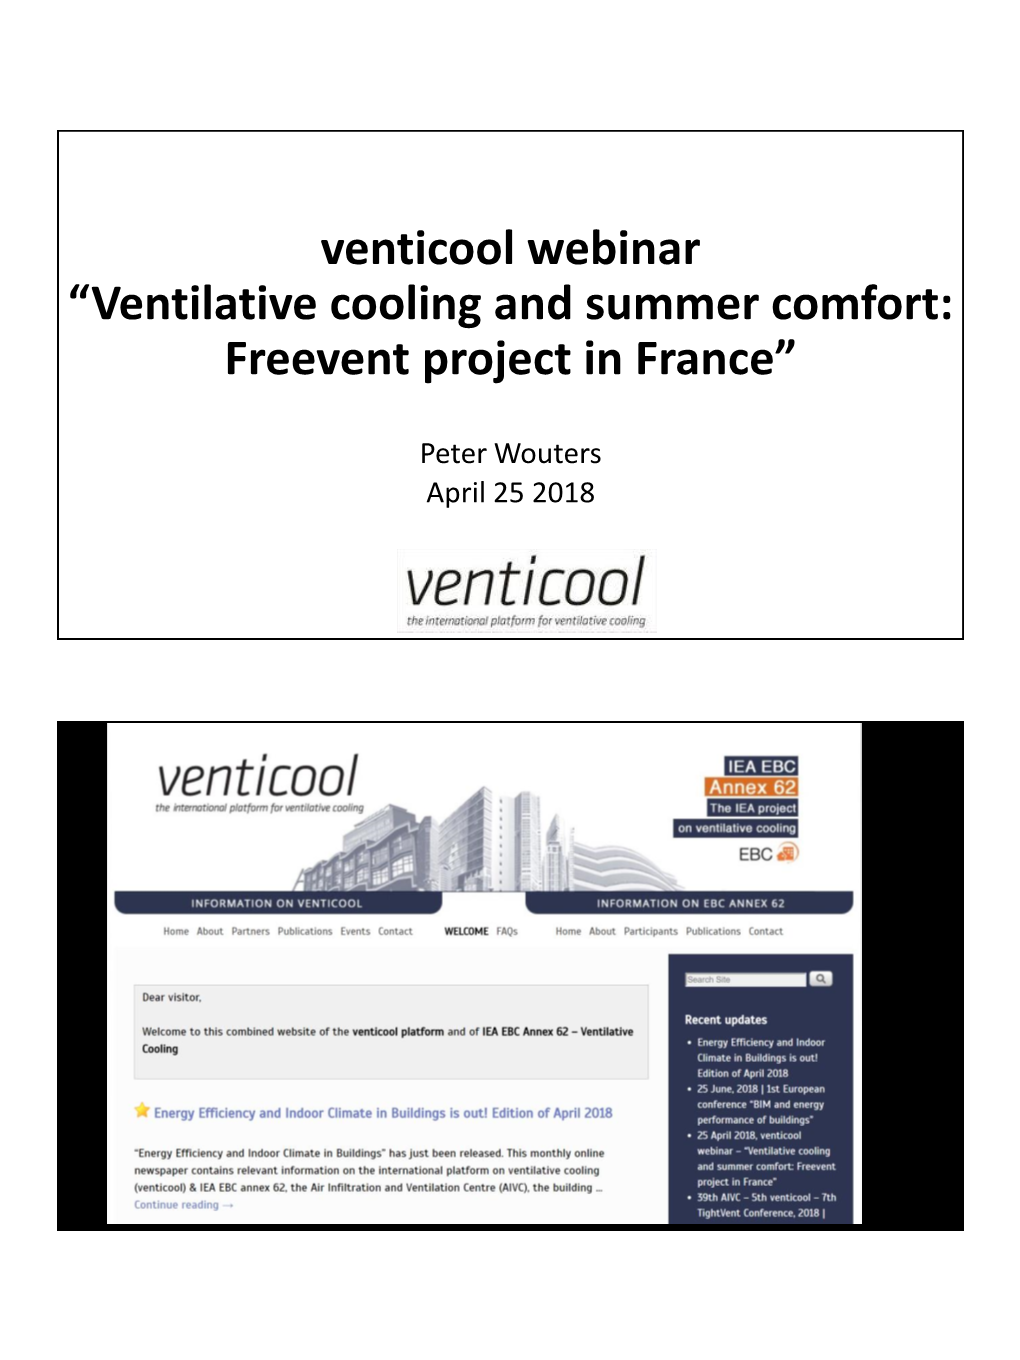 Ventilative Cooling and Summer Comfort: Freevent Project in France”